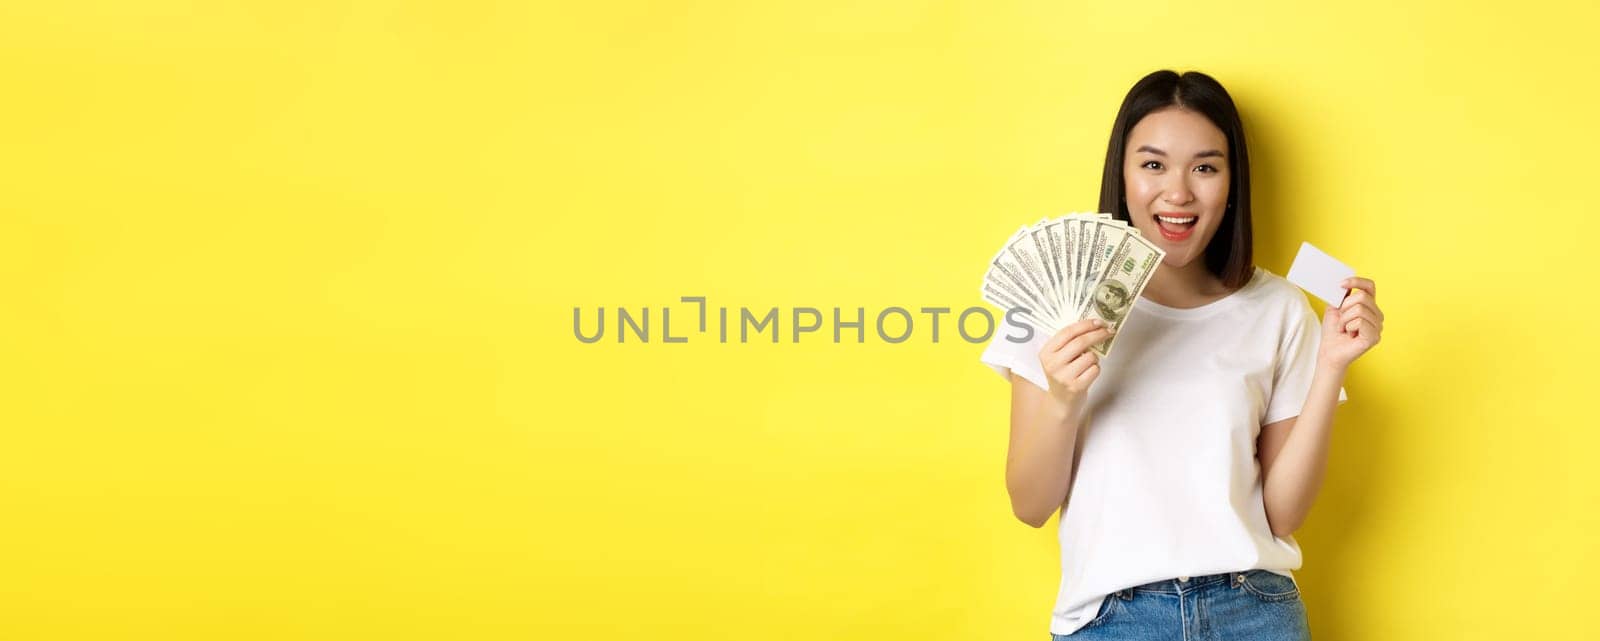 Beautiful asian woman with short dark hair, wearing white t-shirt, showing money in dollars and plastic credit card, standing over yellow background.